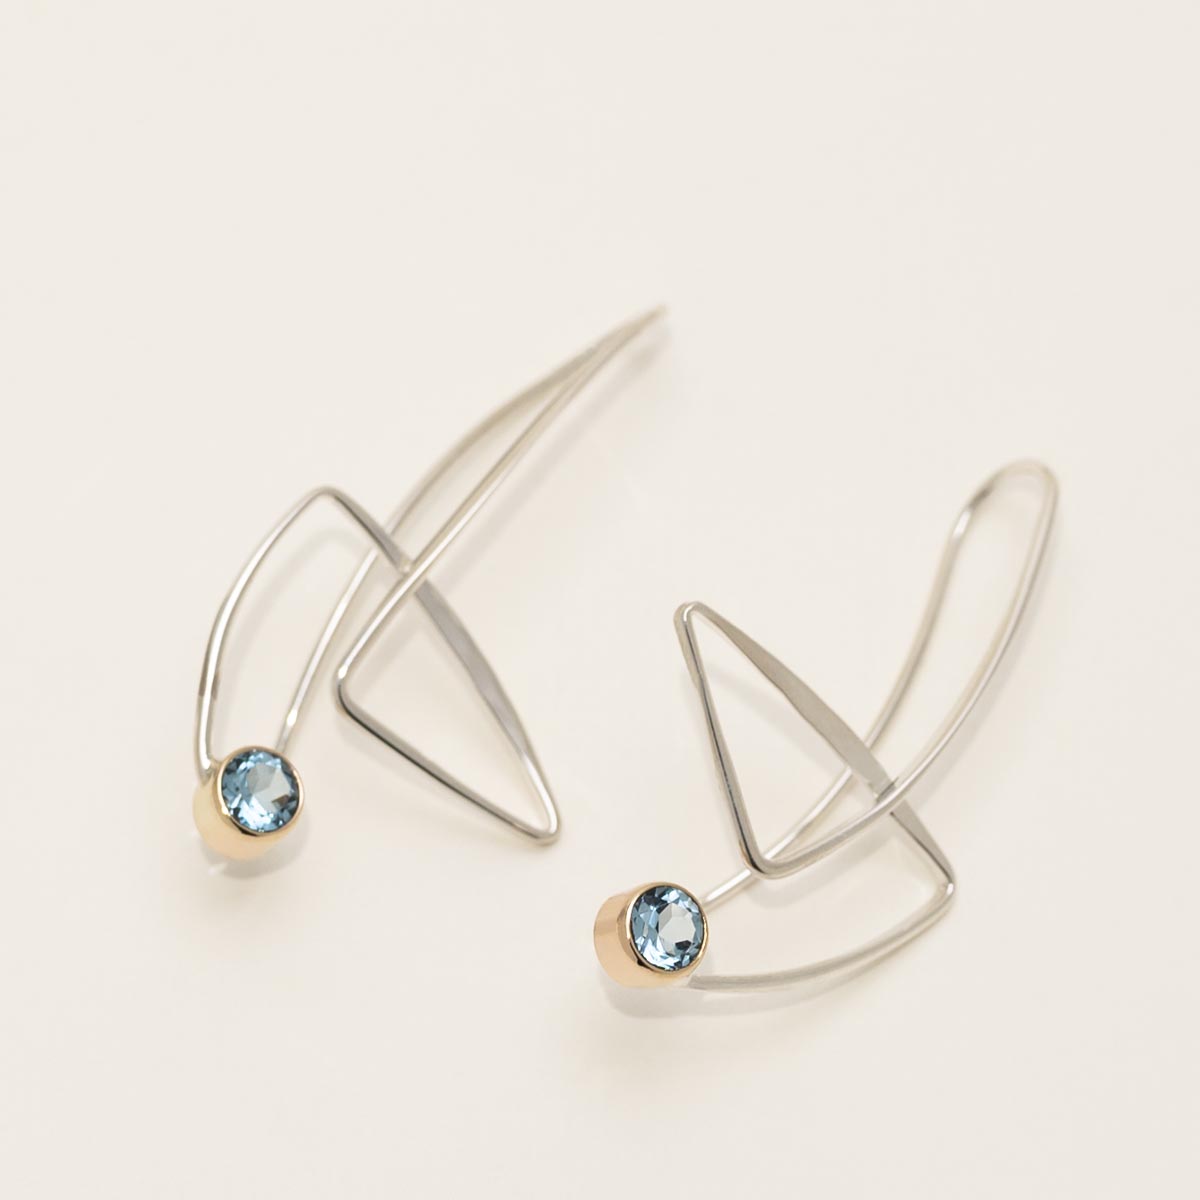 E.L. Designs Blue Topaz Gadabout Earrings in Sterling Silver and 14kt Yellow Gold